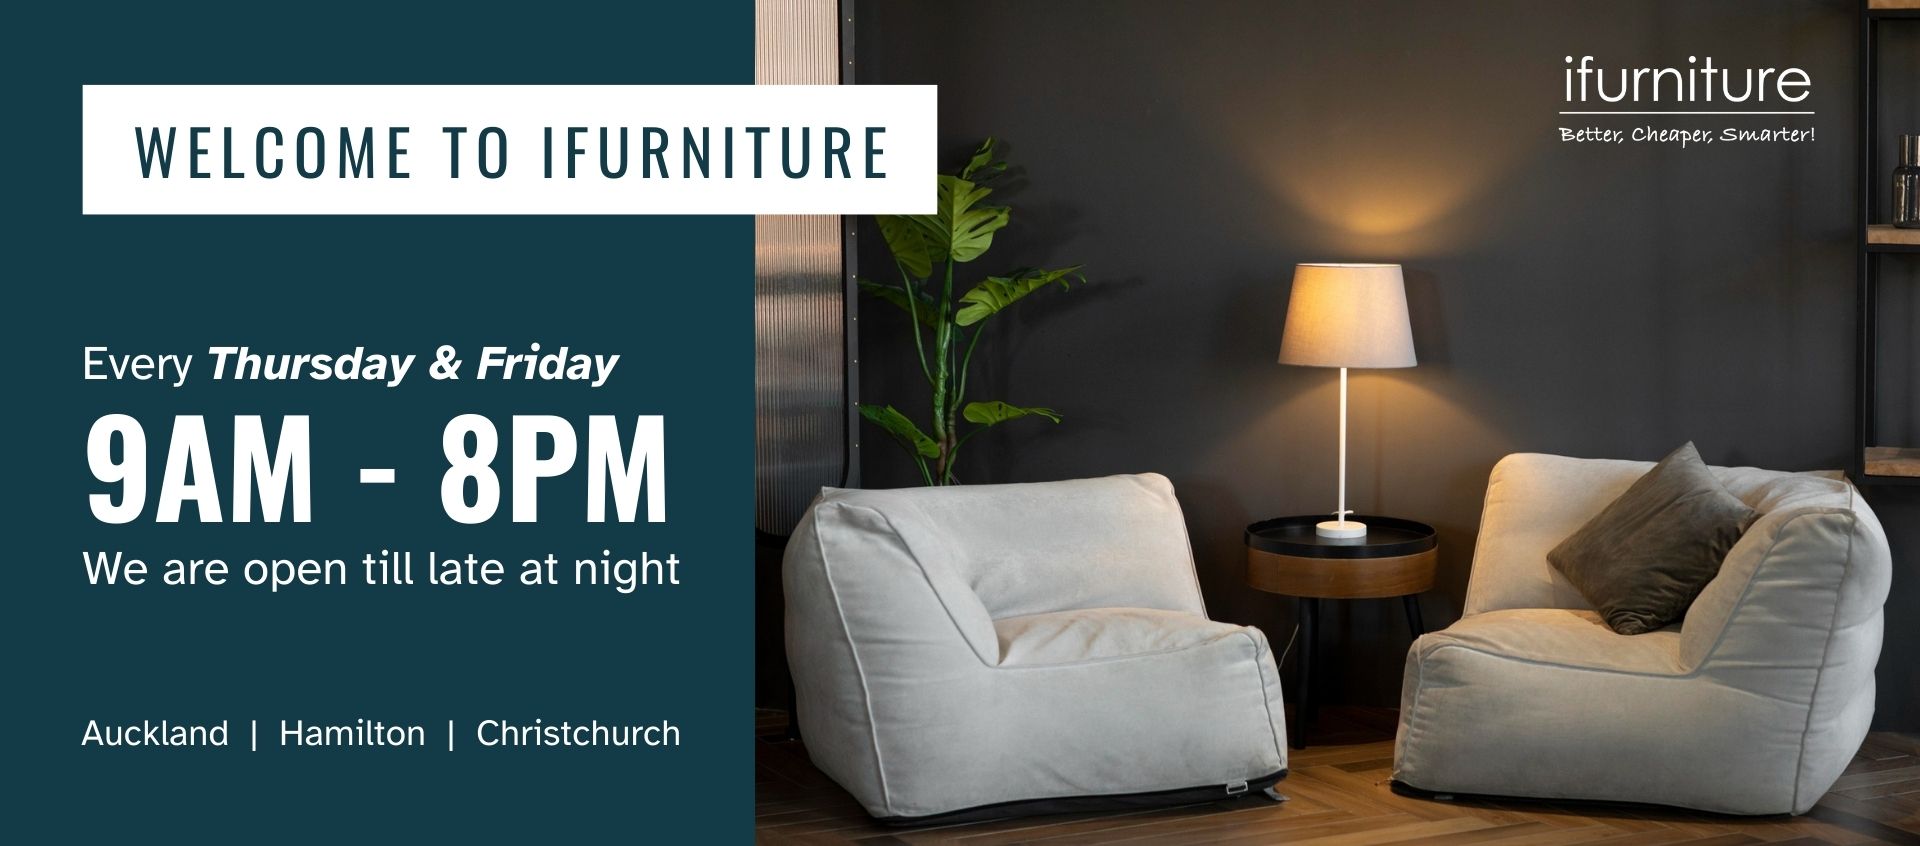 https://www.ifurniture.co.nz/images/thumbs/0060870_Midnight%20hours%20banner.jpeg